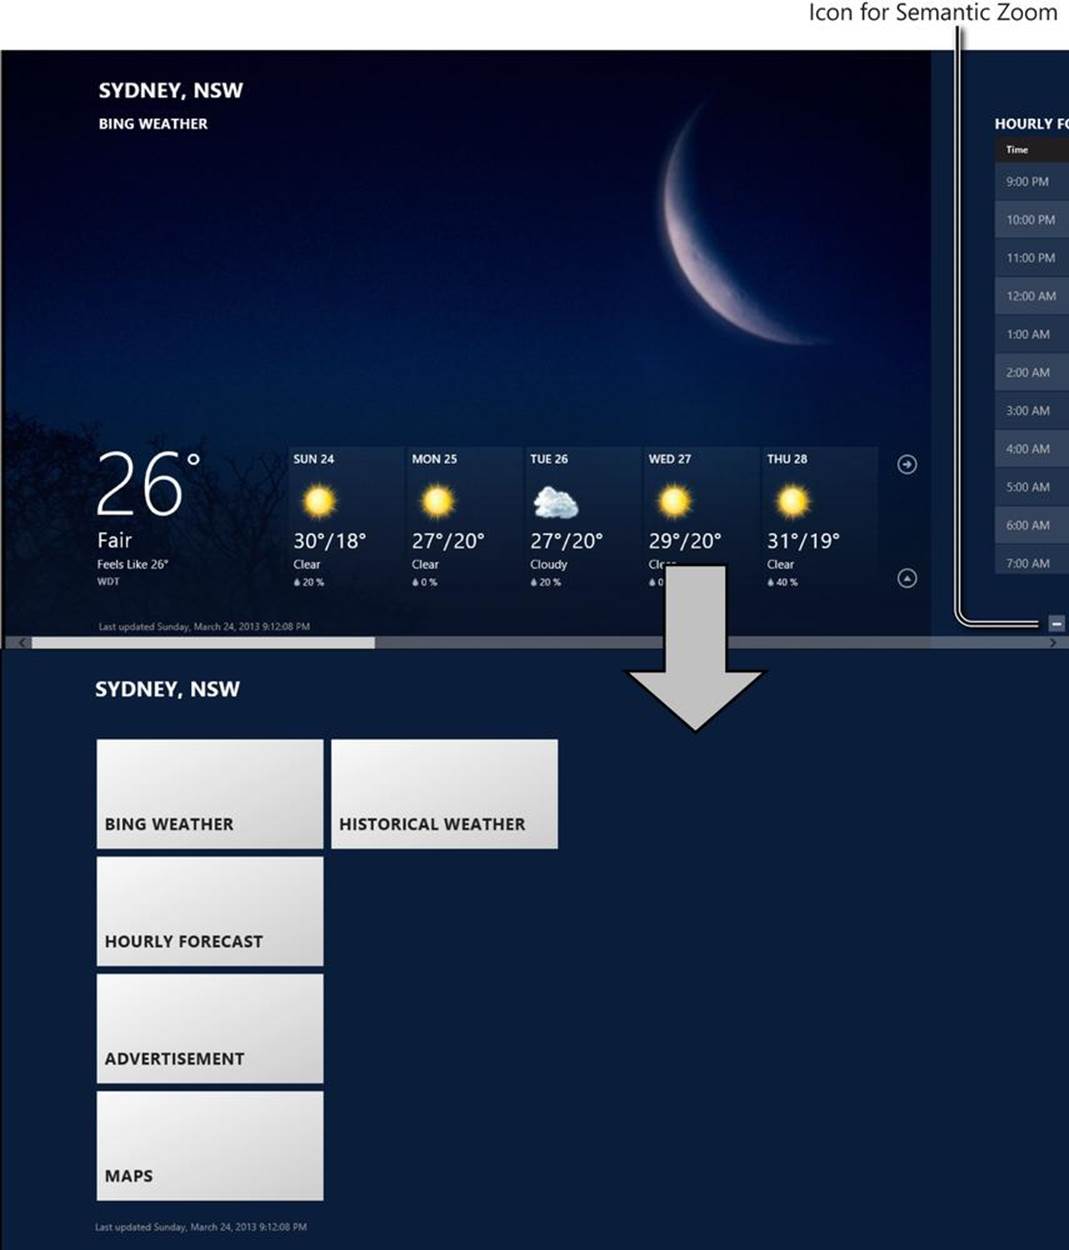 A screenshot of the Weather app in Windows 8. A callout points to the icon for Semantic Zoom. a large callout arrow points down to a list of app sections: BING WEATHER, HOURLY FORECAST, ADVERTISEMENT, MAPS, HISTORICAL WEATHER. The zoom icon can be clicked to zoom out of the main page of the app.